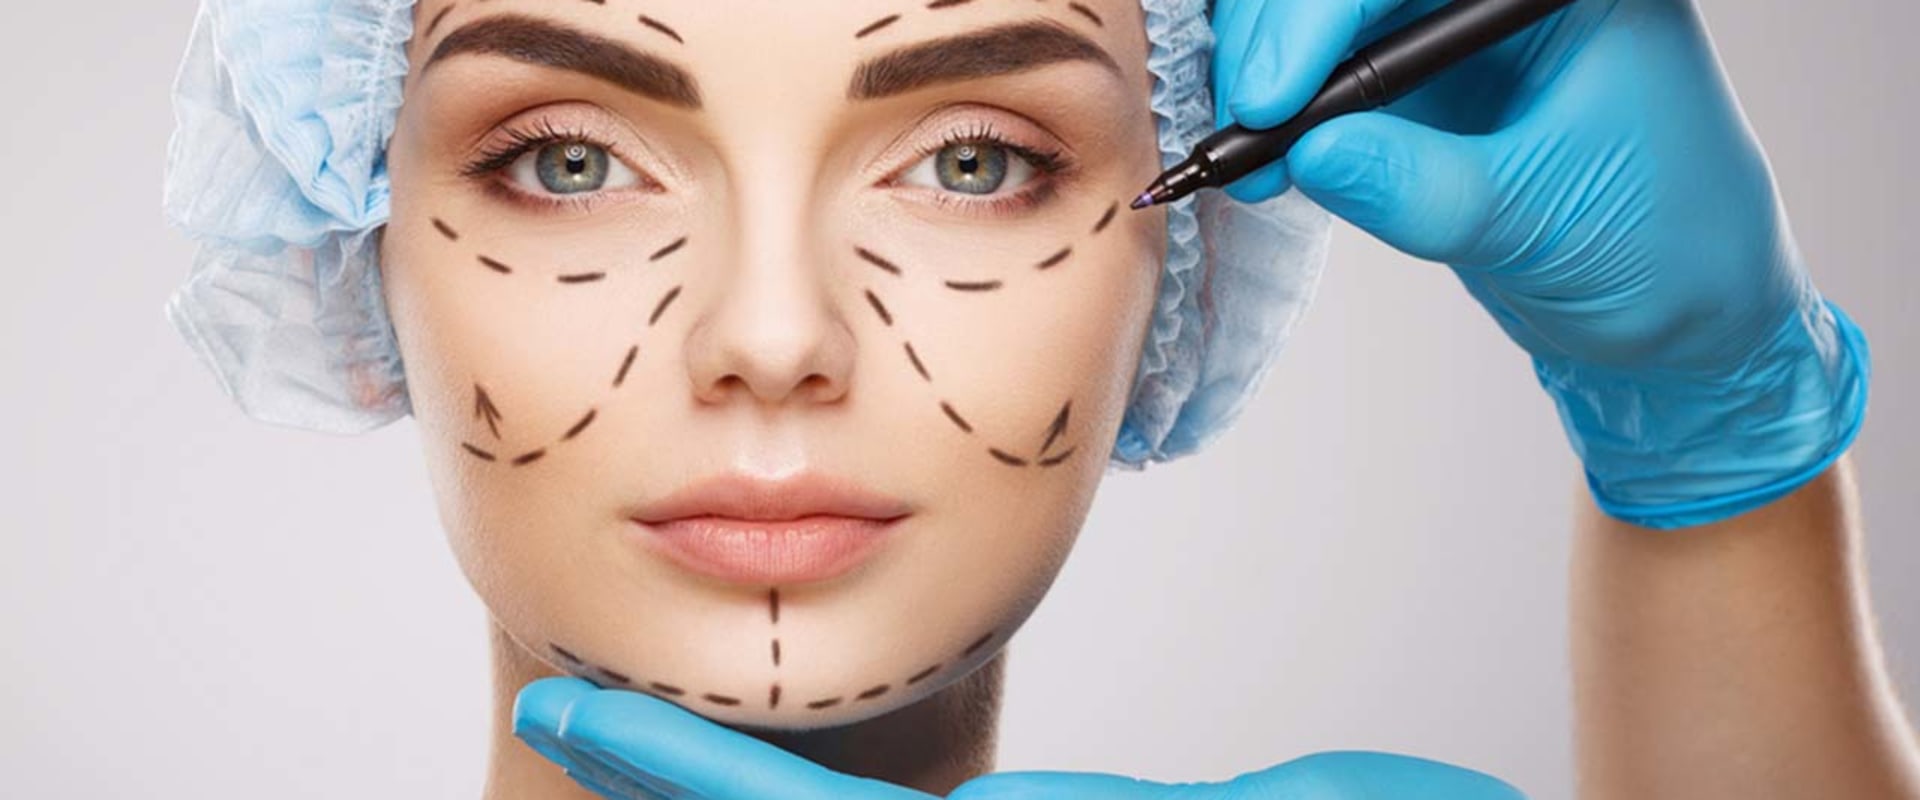 The Pros and Cons of Being a Plastic Surgeon